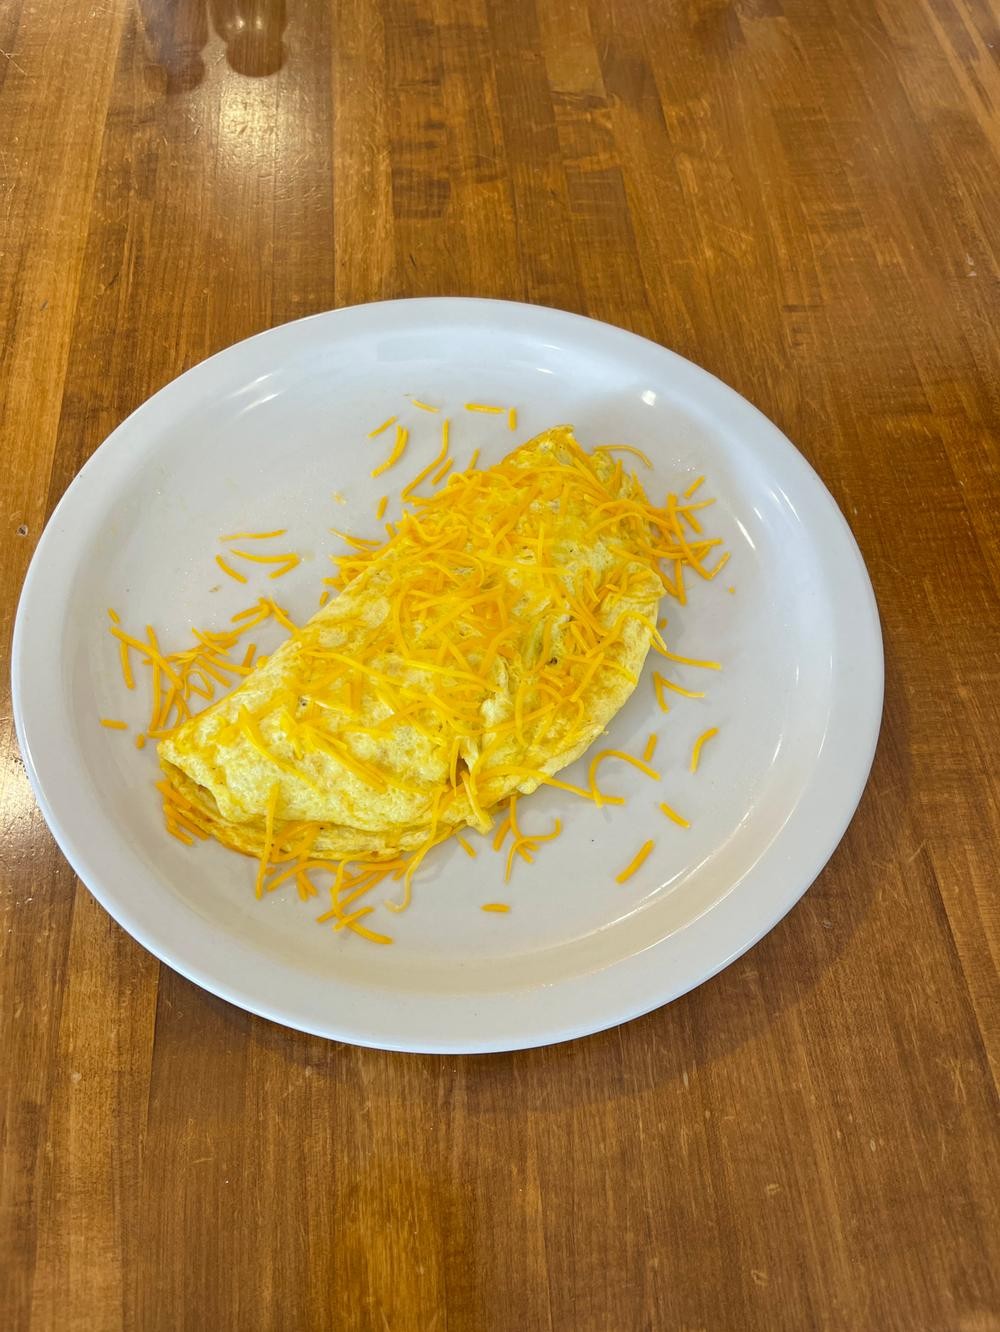 Build Your Own Omelette